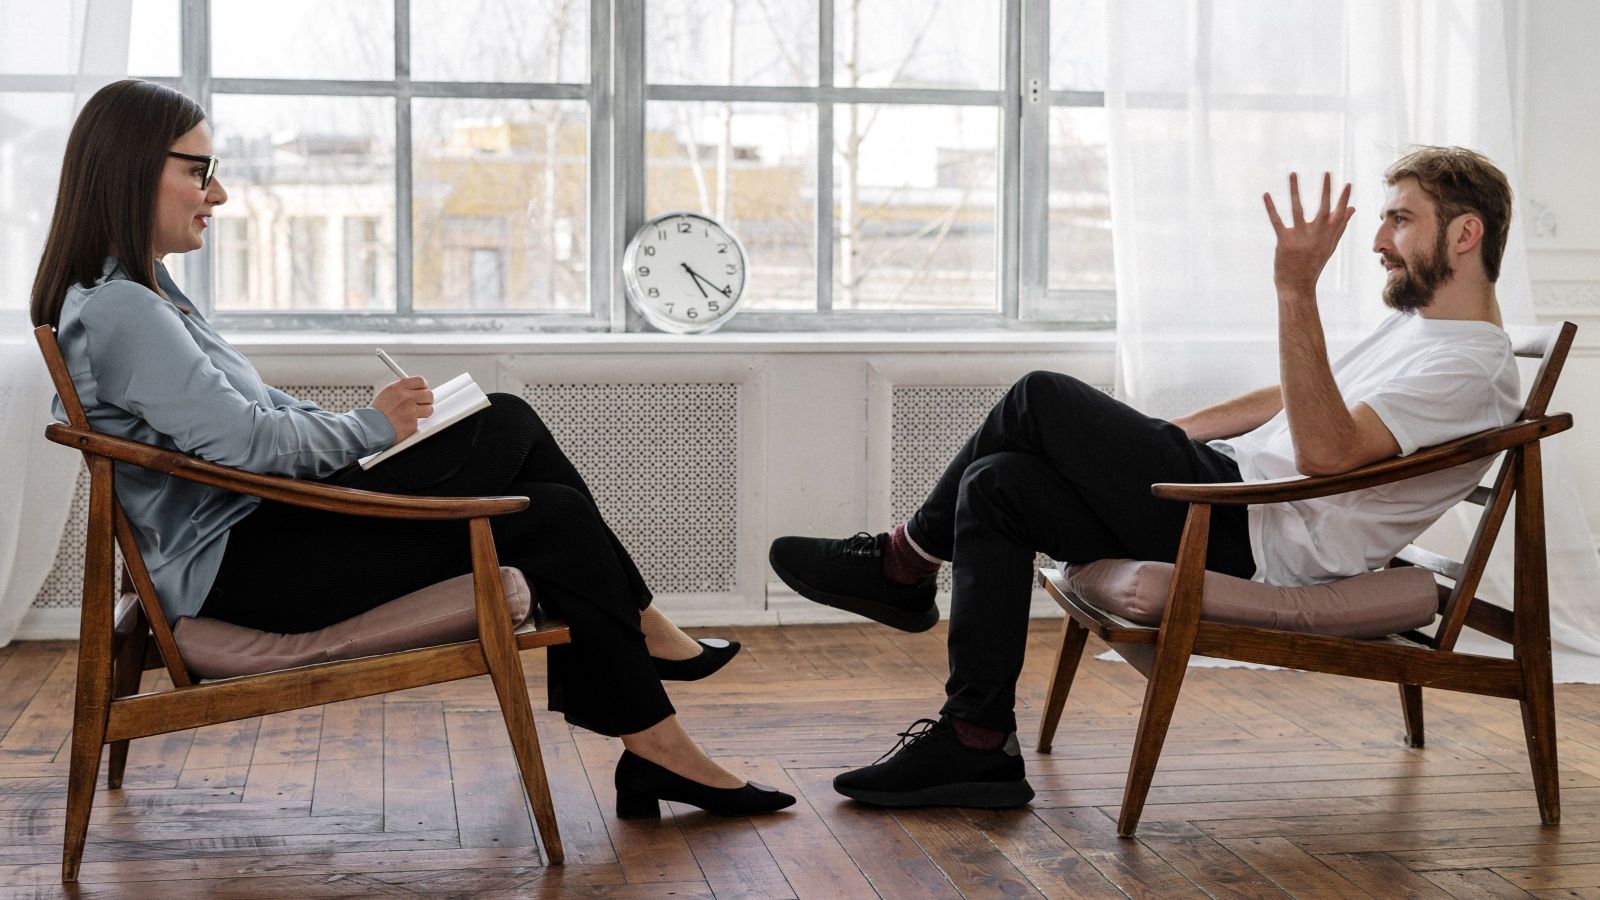 woman and man sitting in uncomfortable chairs with a clock in the background